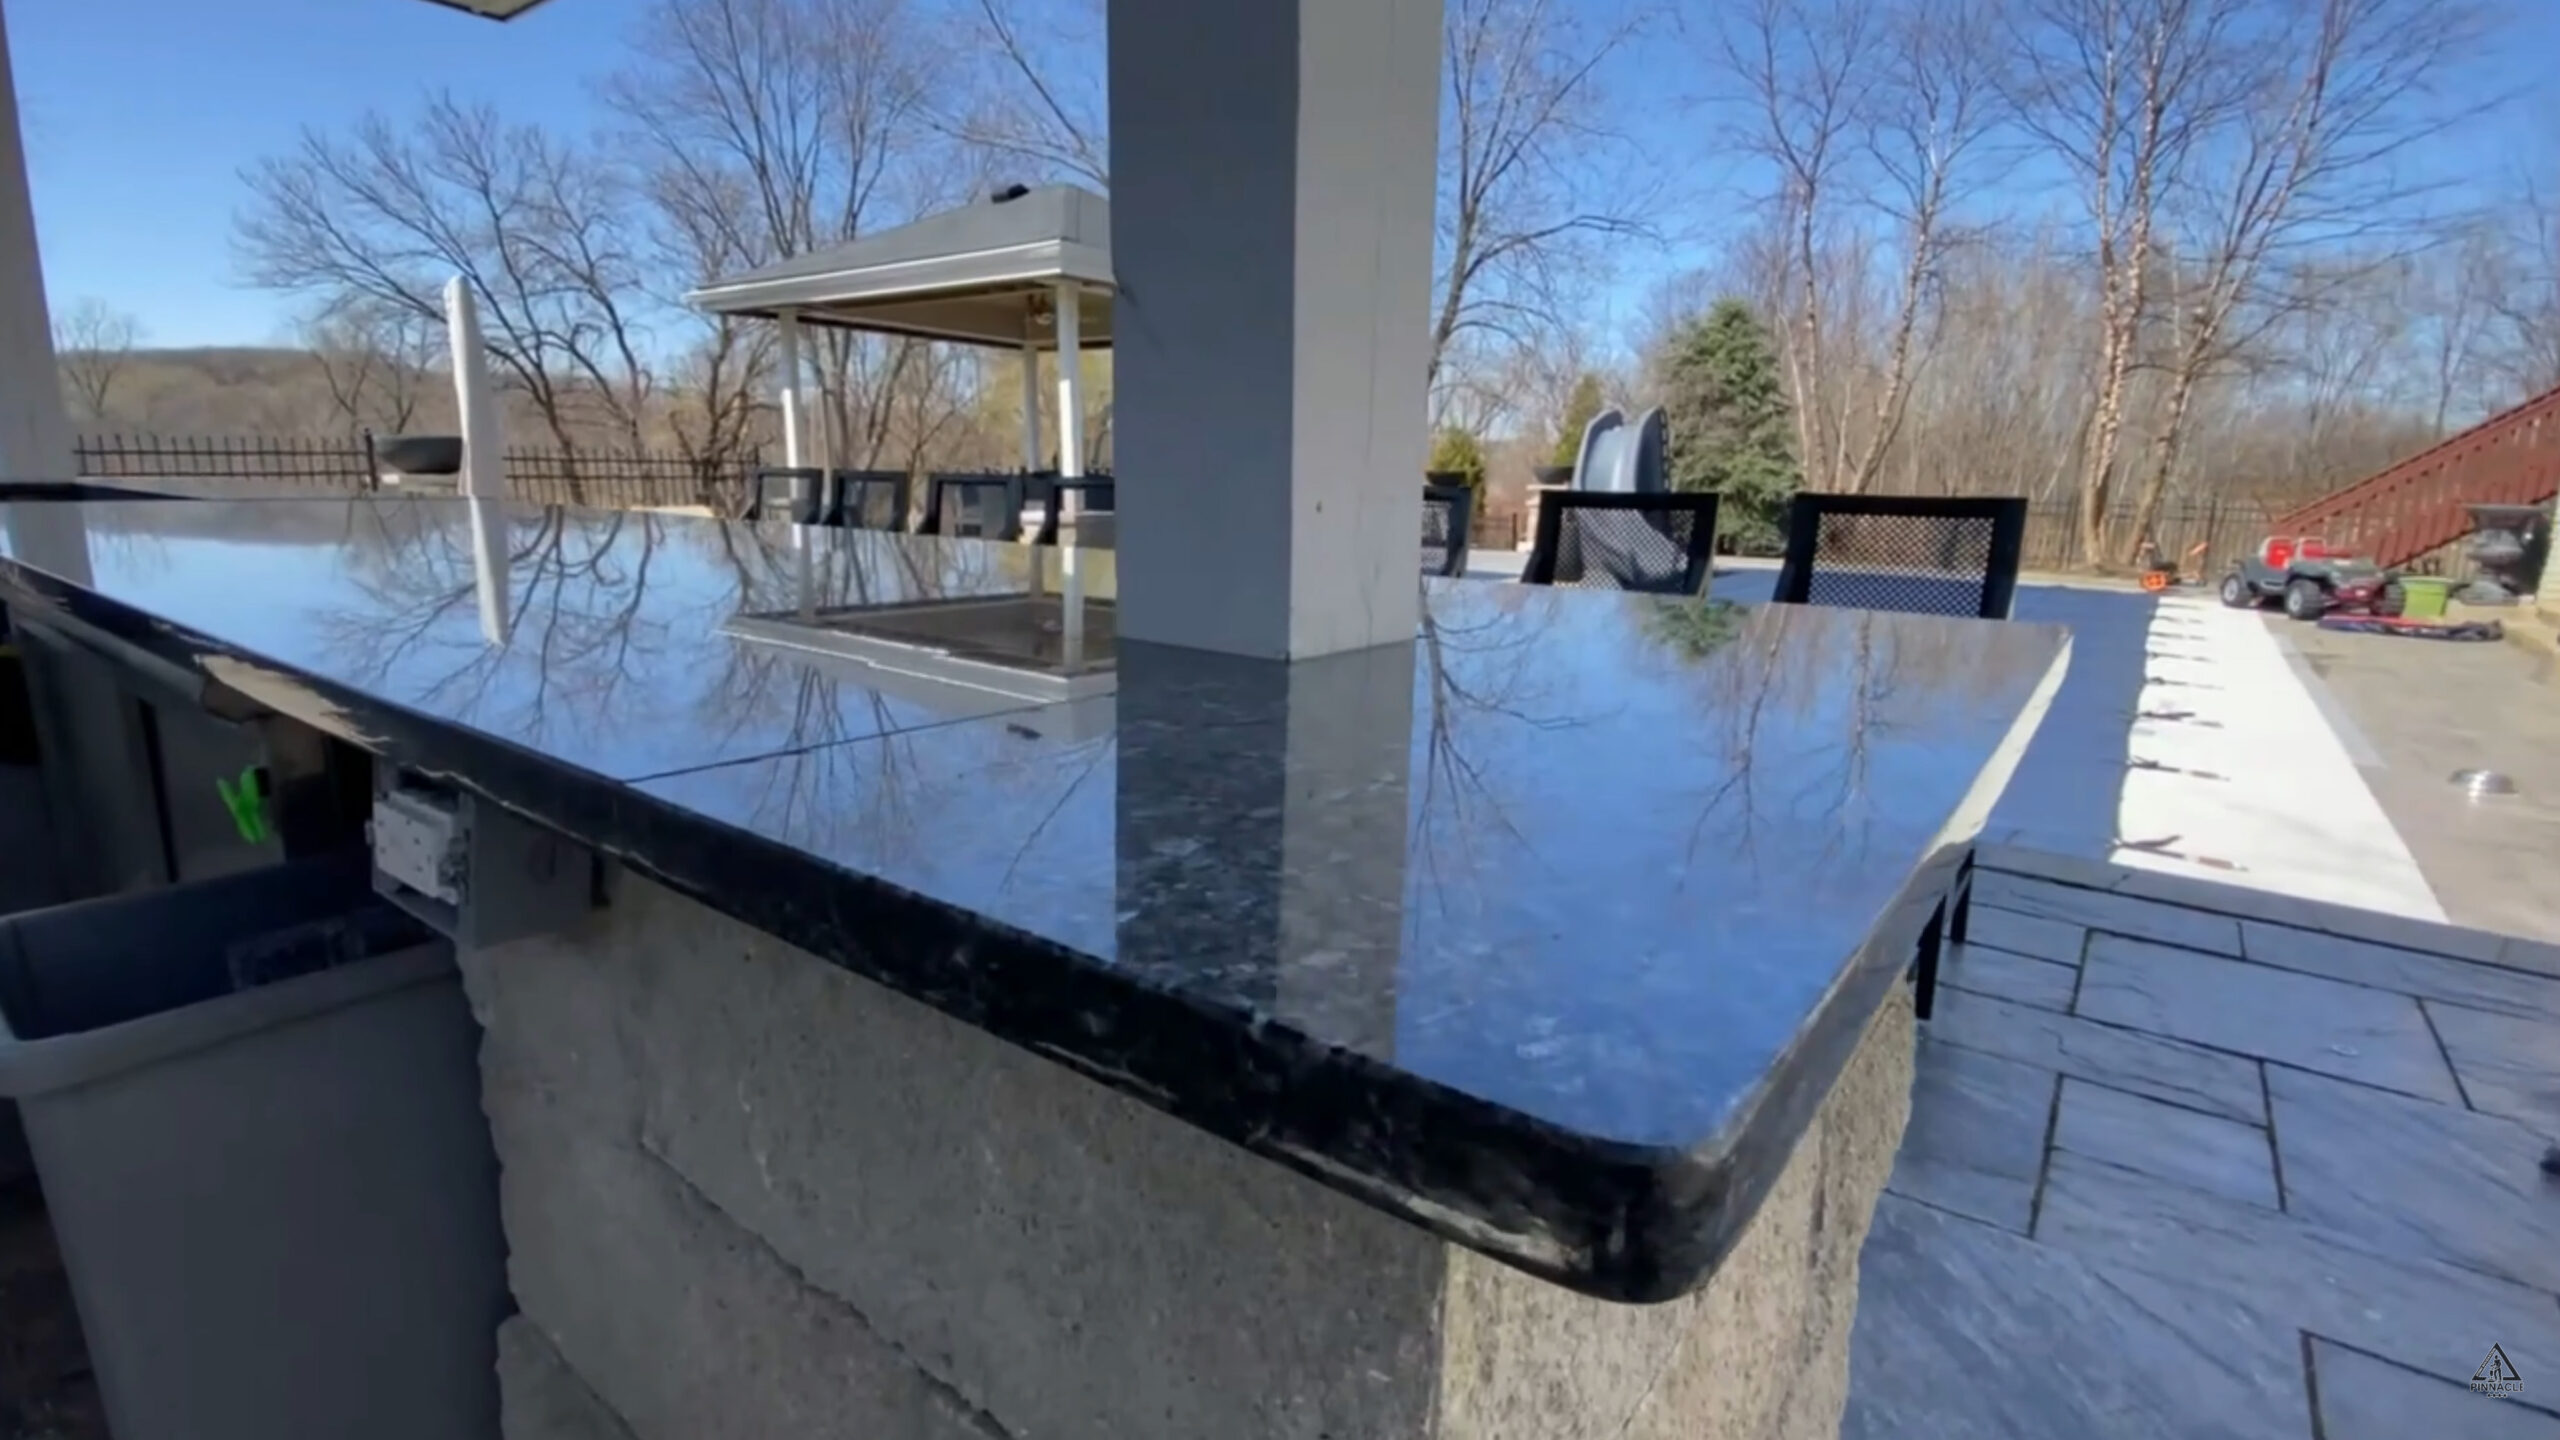 Outdoor granite countertops are ready 4 BBQ season after deep cleaning, buffing, and sealing